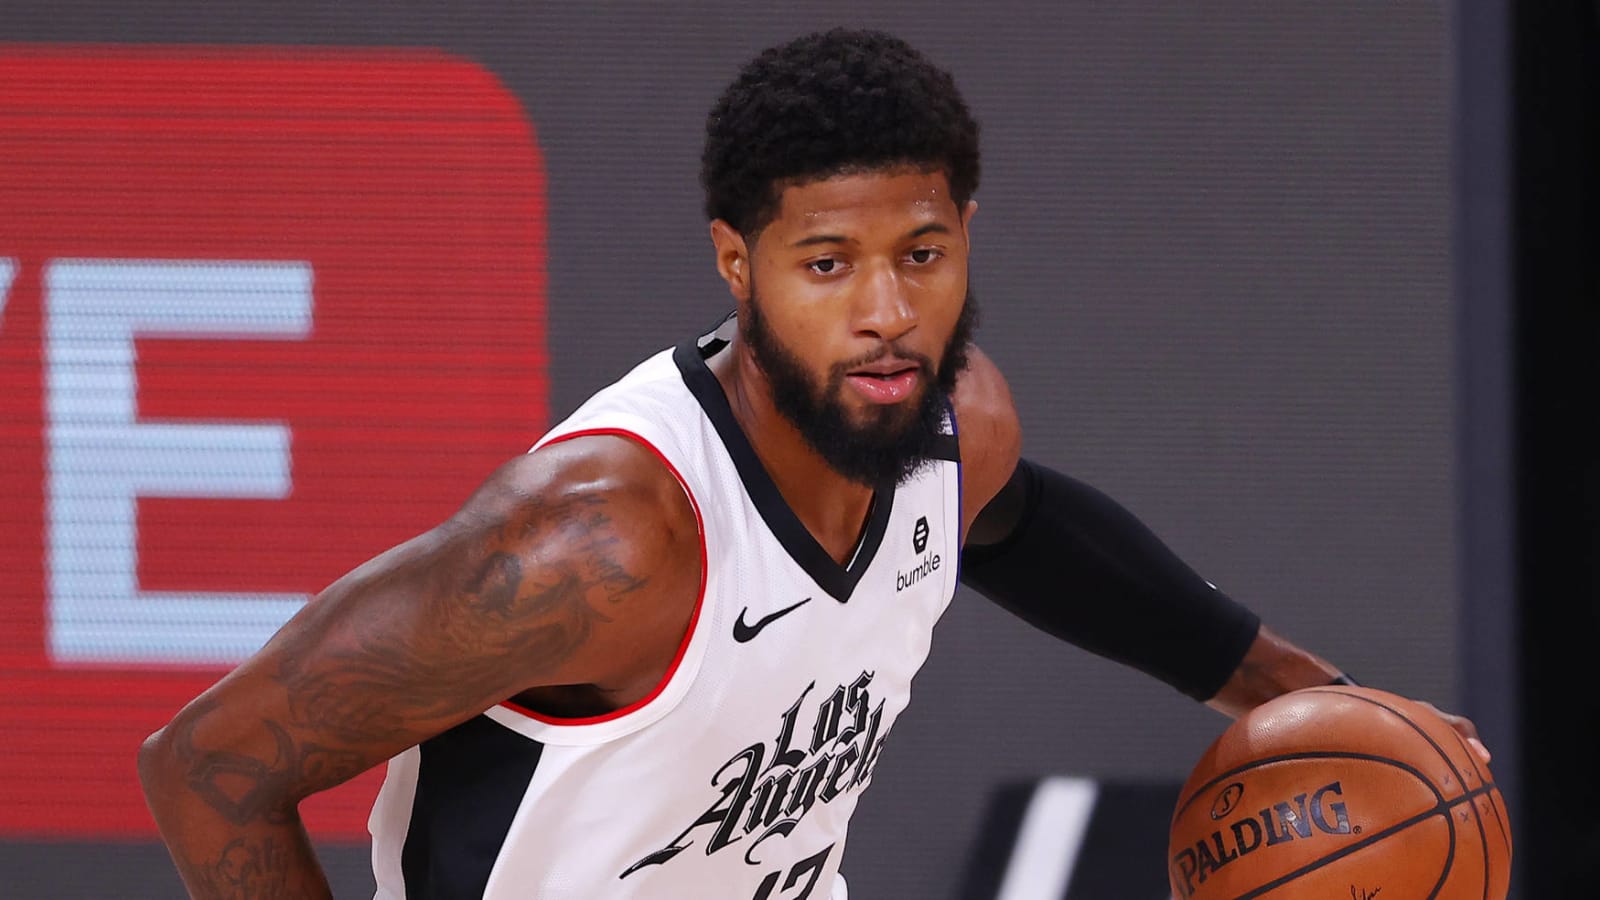 Paul George addresses his Instagram message to the haters